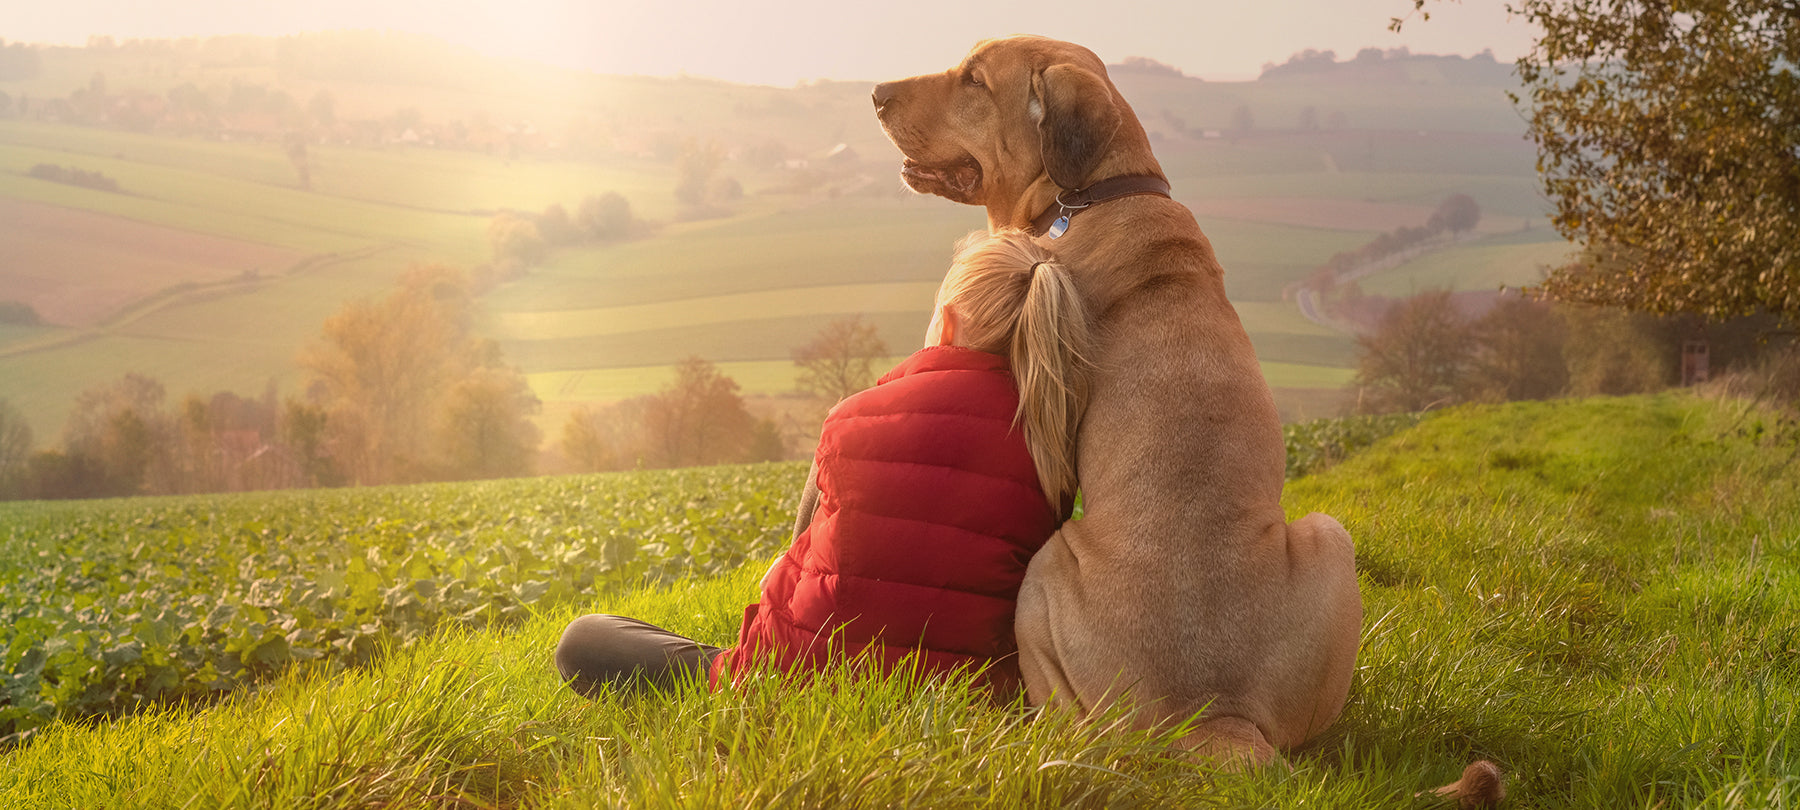 A girl leaning against a dog as they look out over a beautiful field with the sun rising in the distance.